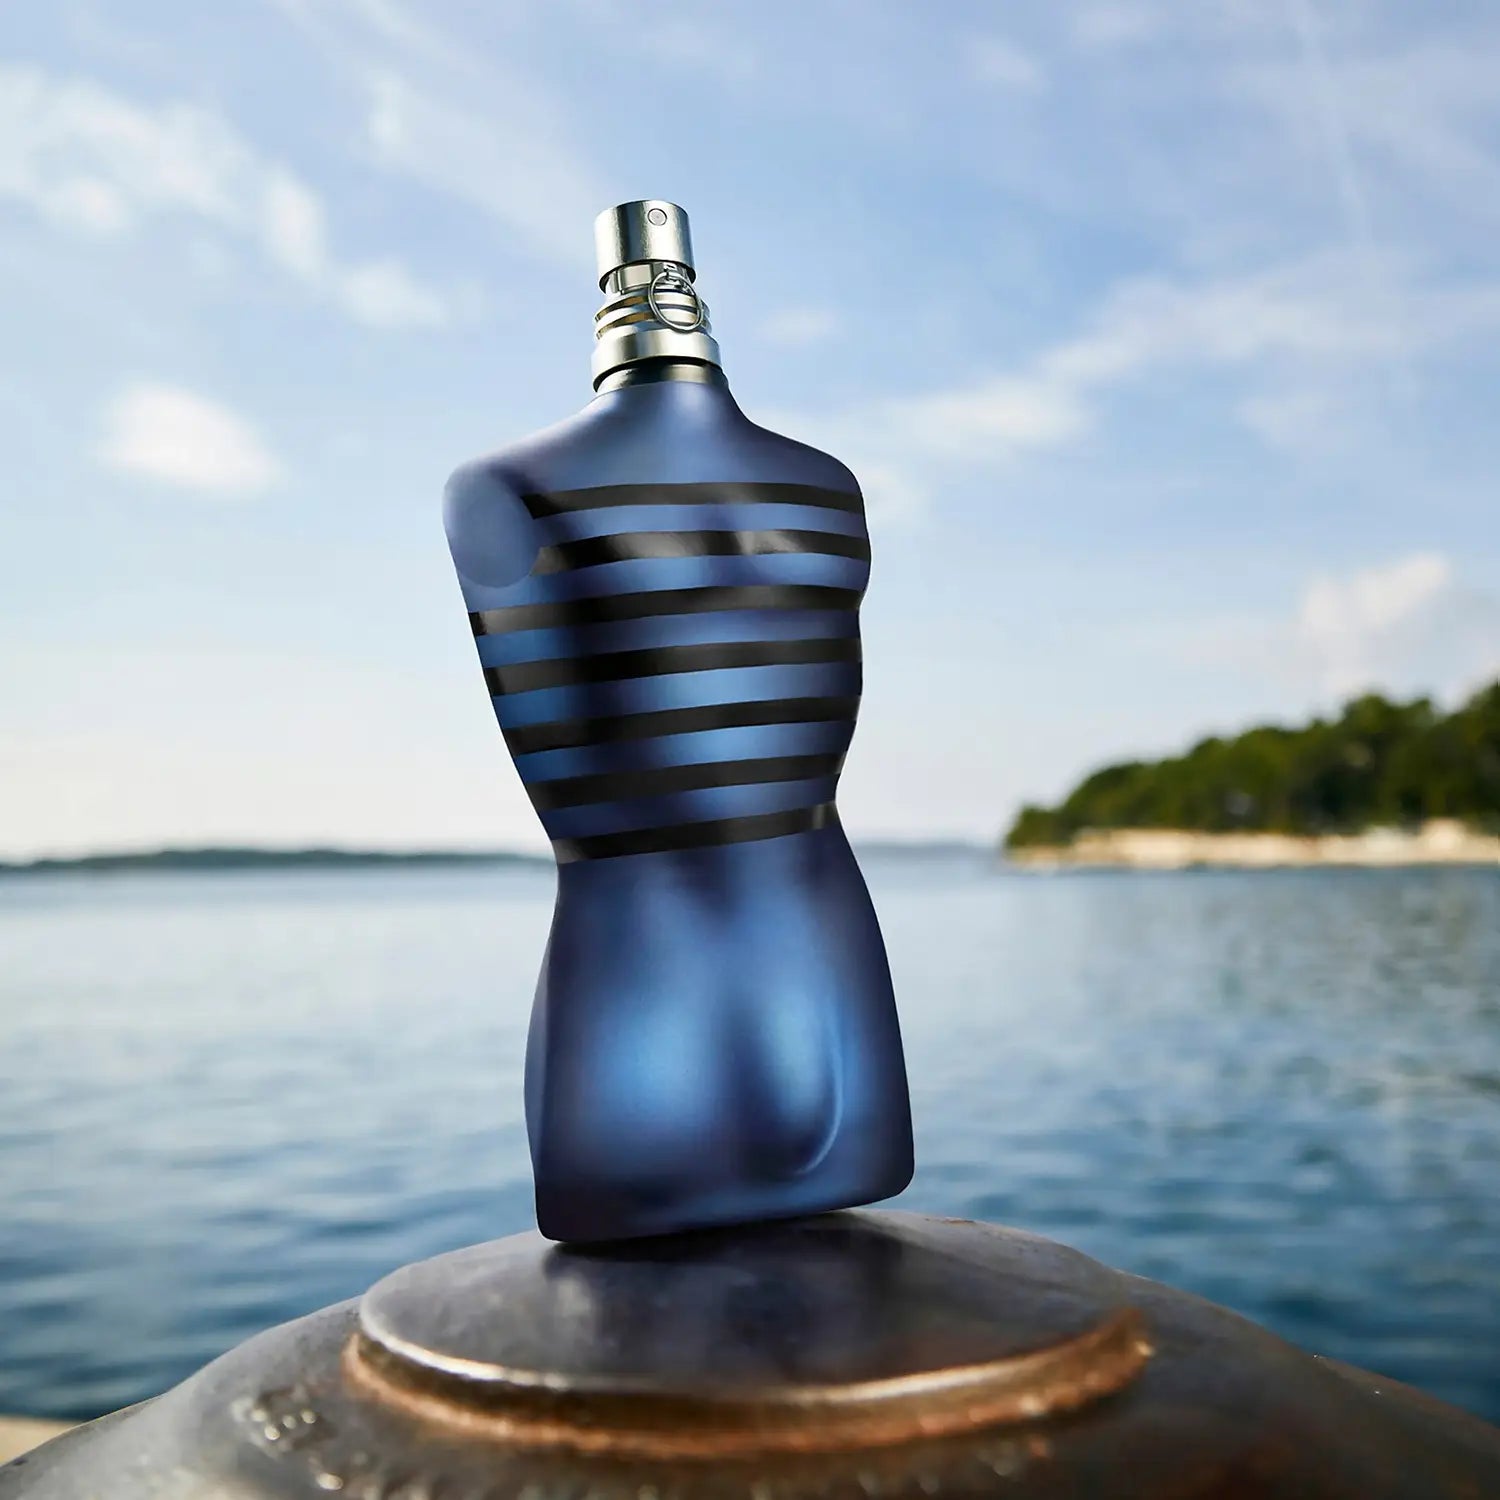 Which Is the Best Gaultier Perfume? Pharmacy – Questmoor Jean Paul